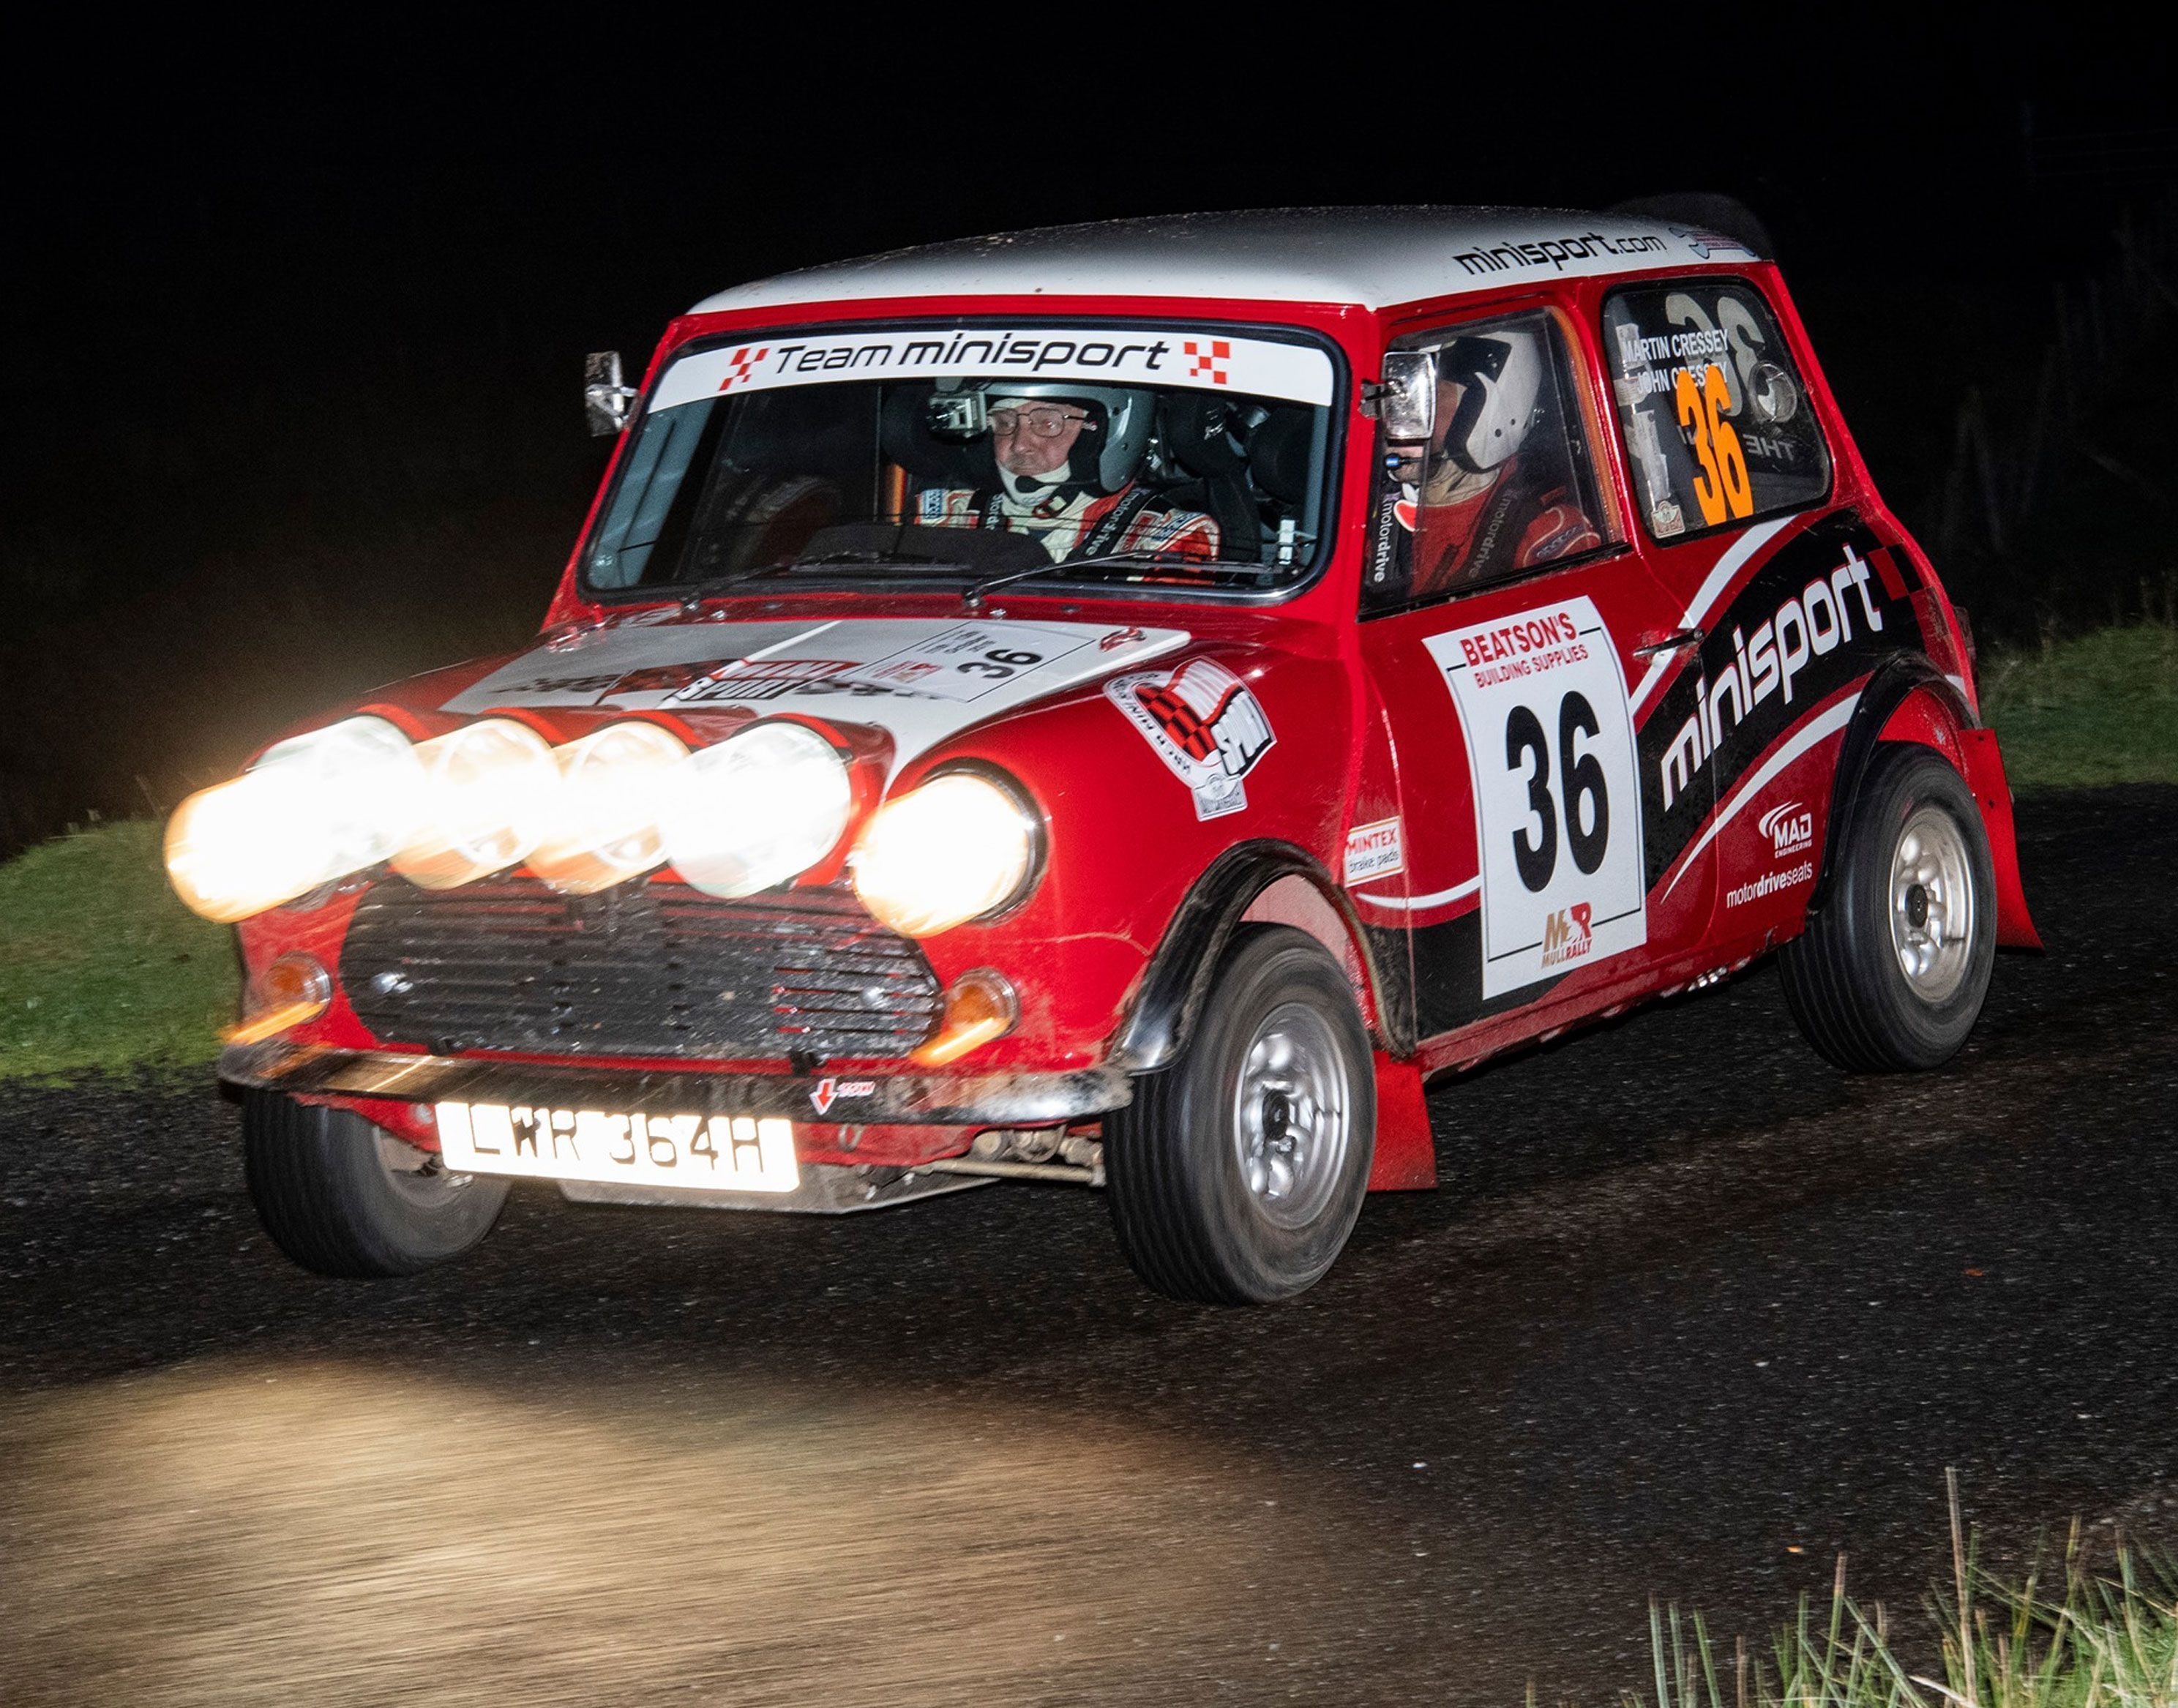 One of Team Mini Sport's Rally Minis competing on Mull Rally 2019